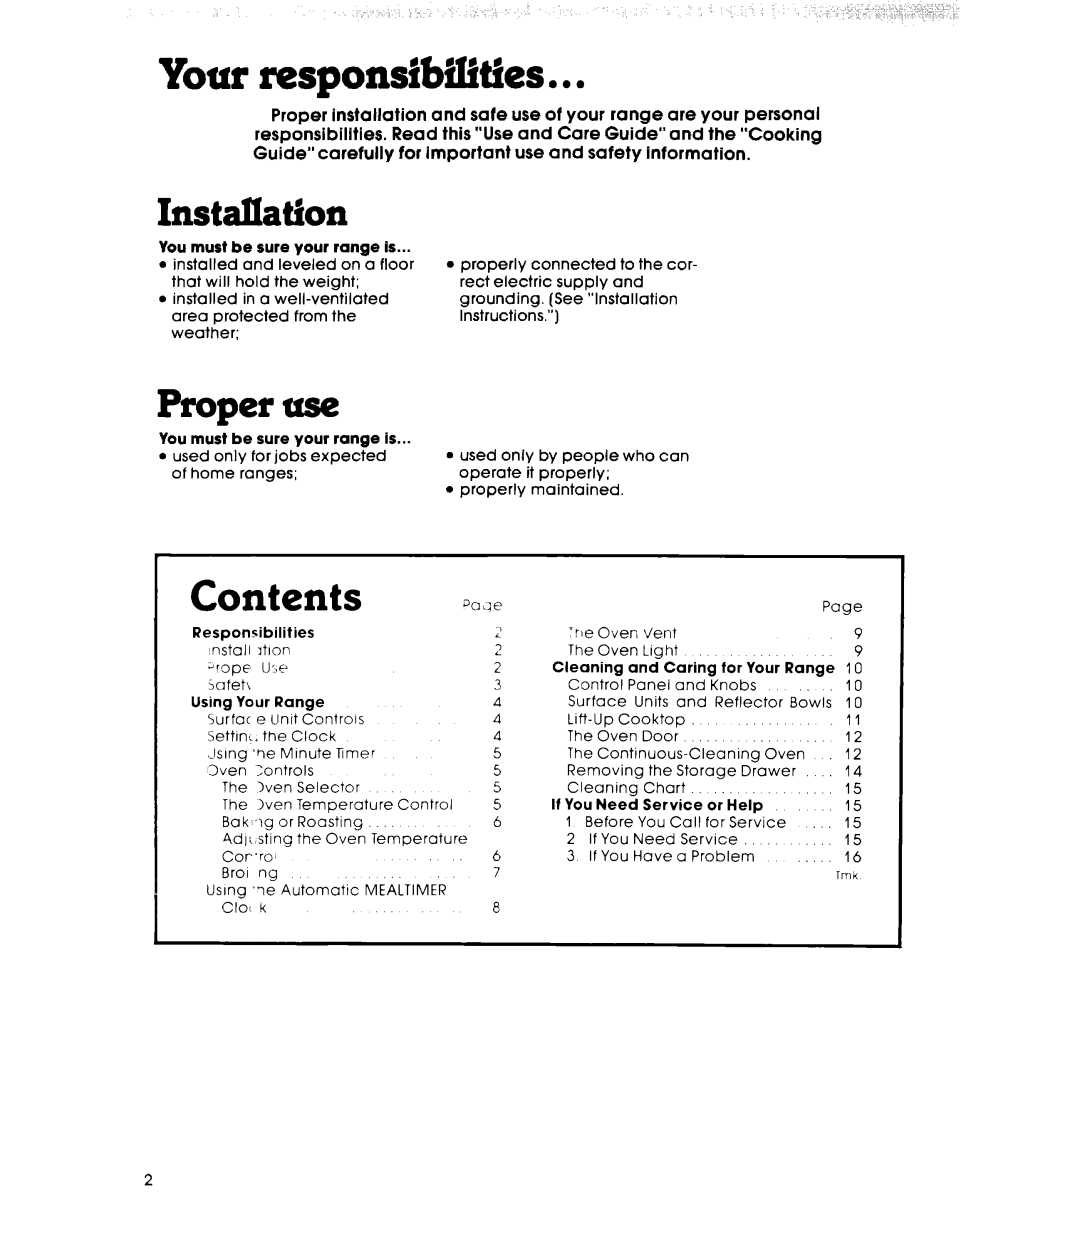 Whirlpool RF4400XL manual Your responsibilities, Contents, “a3e, Proper use 